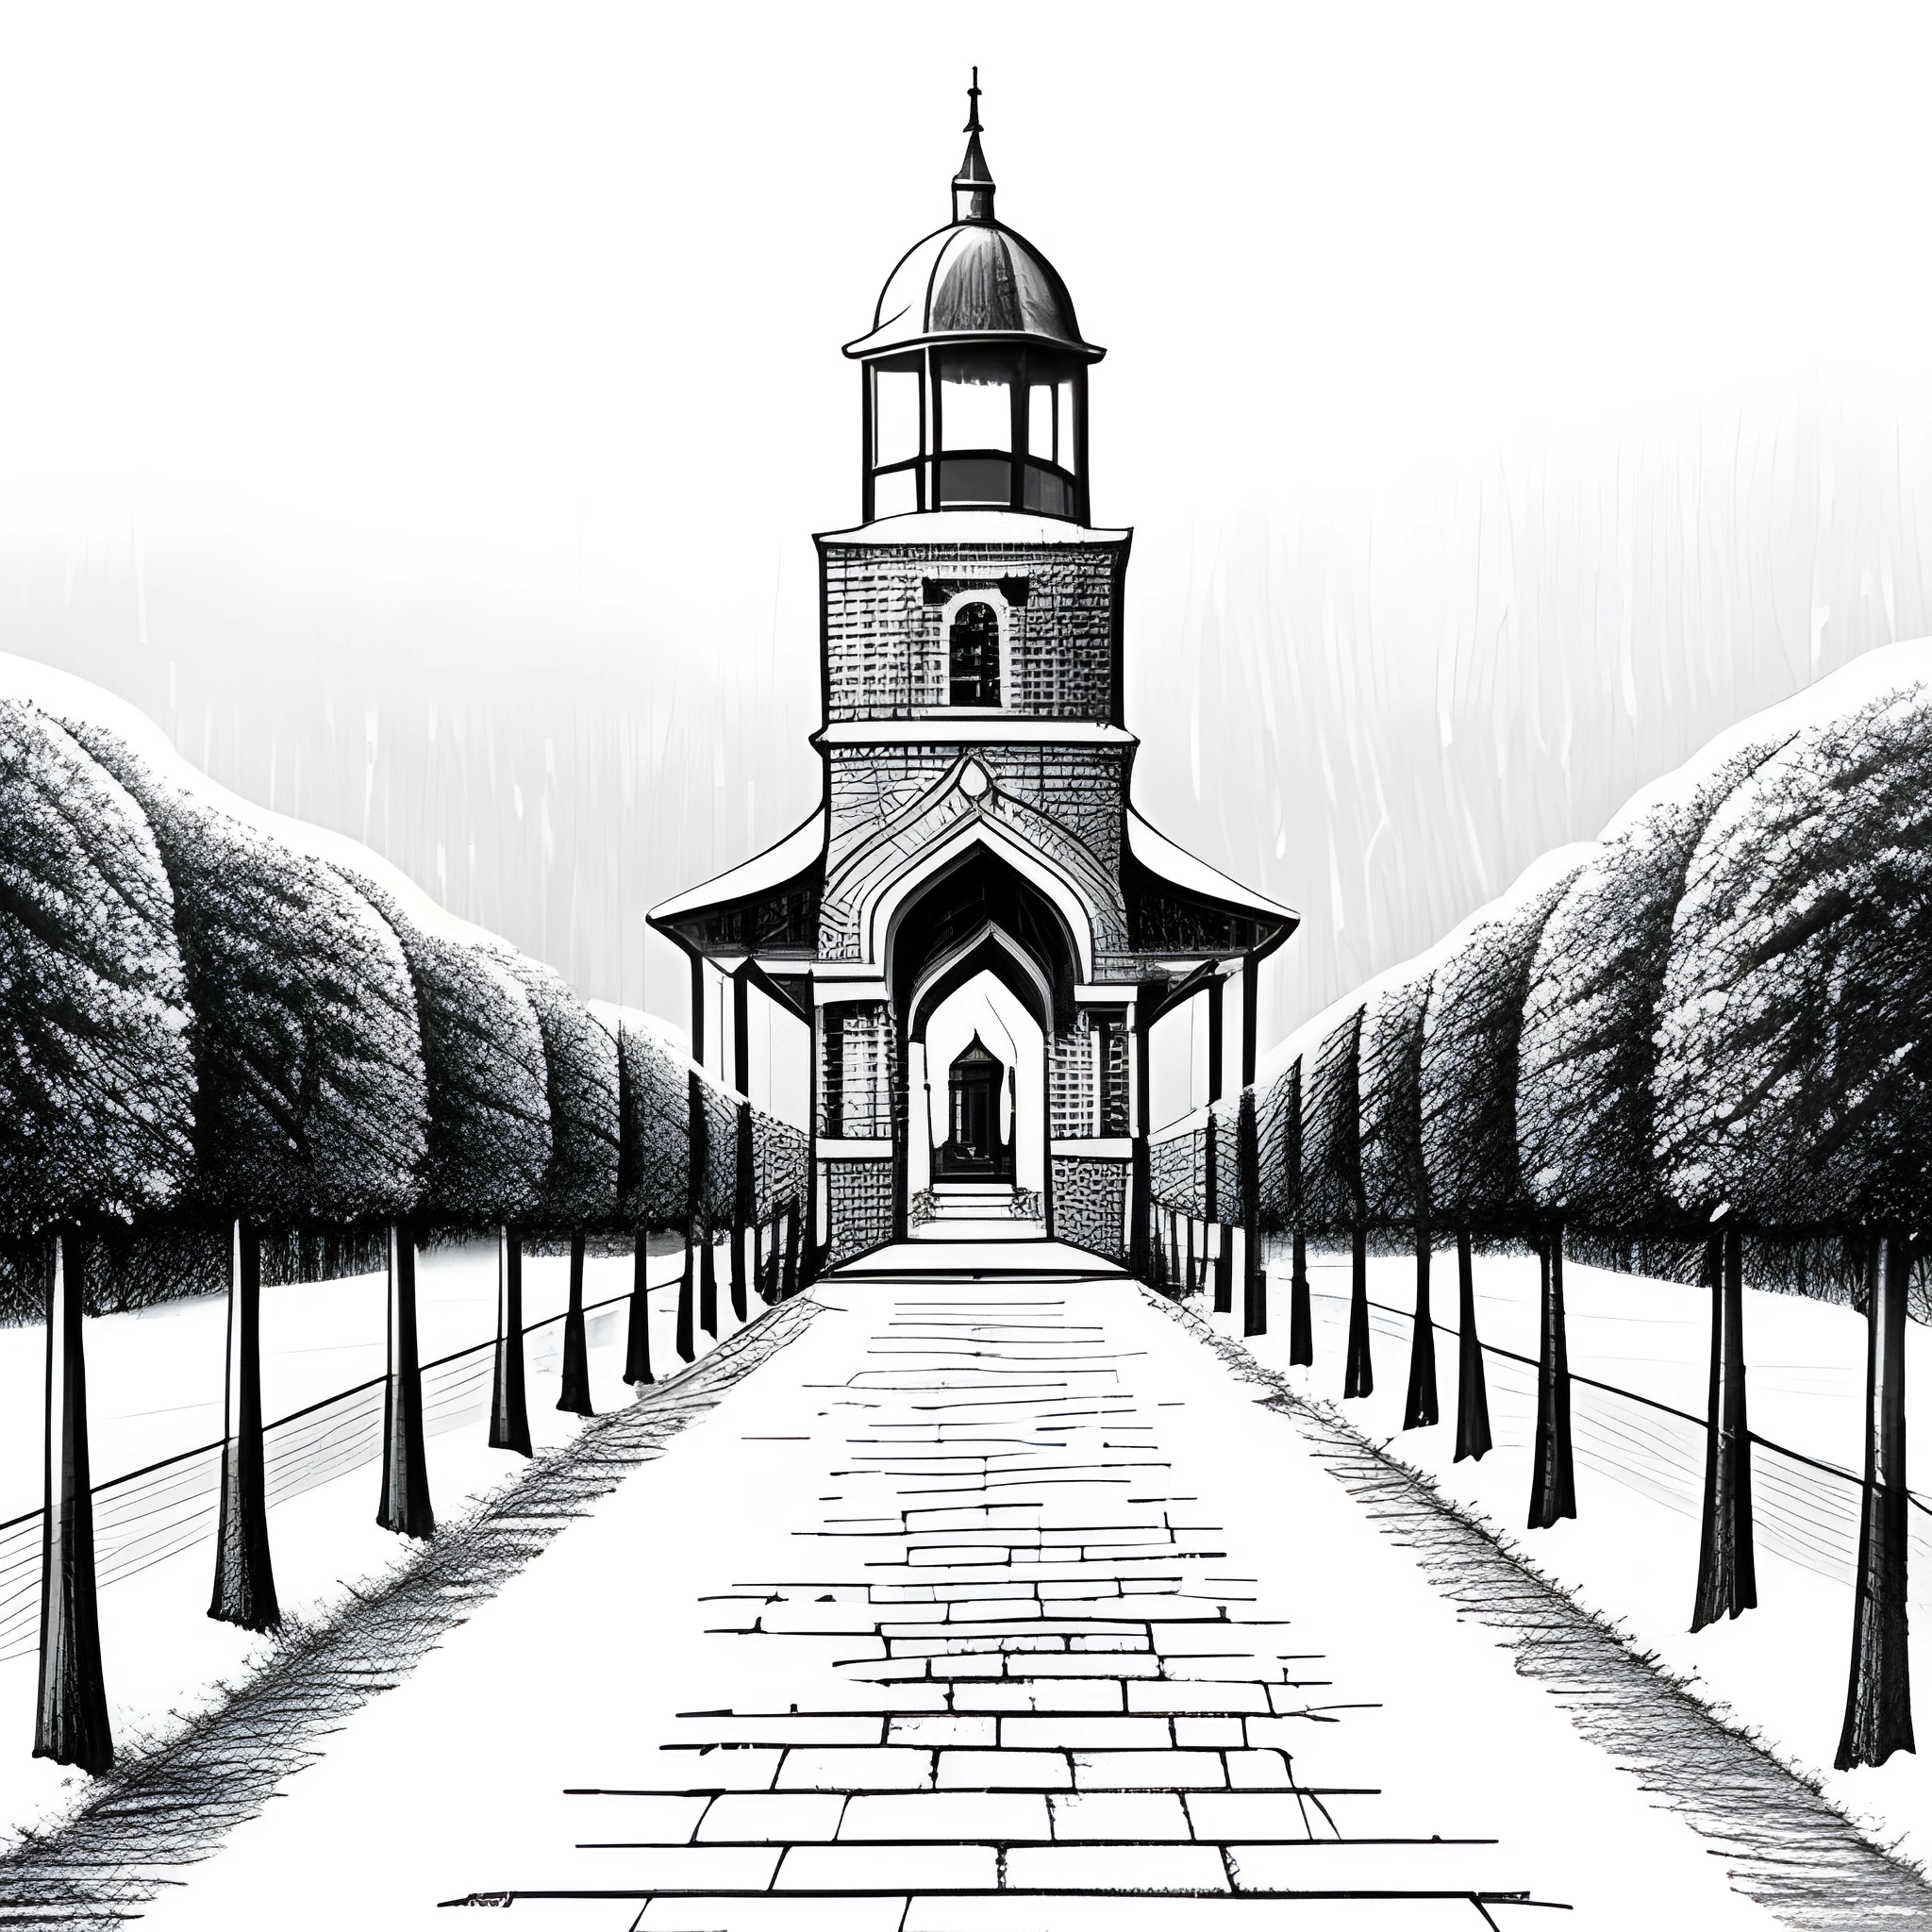 drawing of a church with a steeple and a walkway